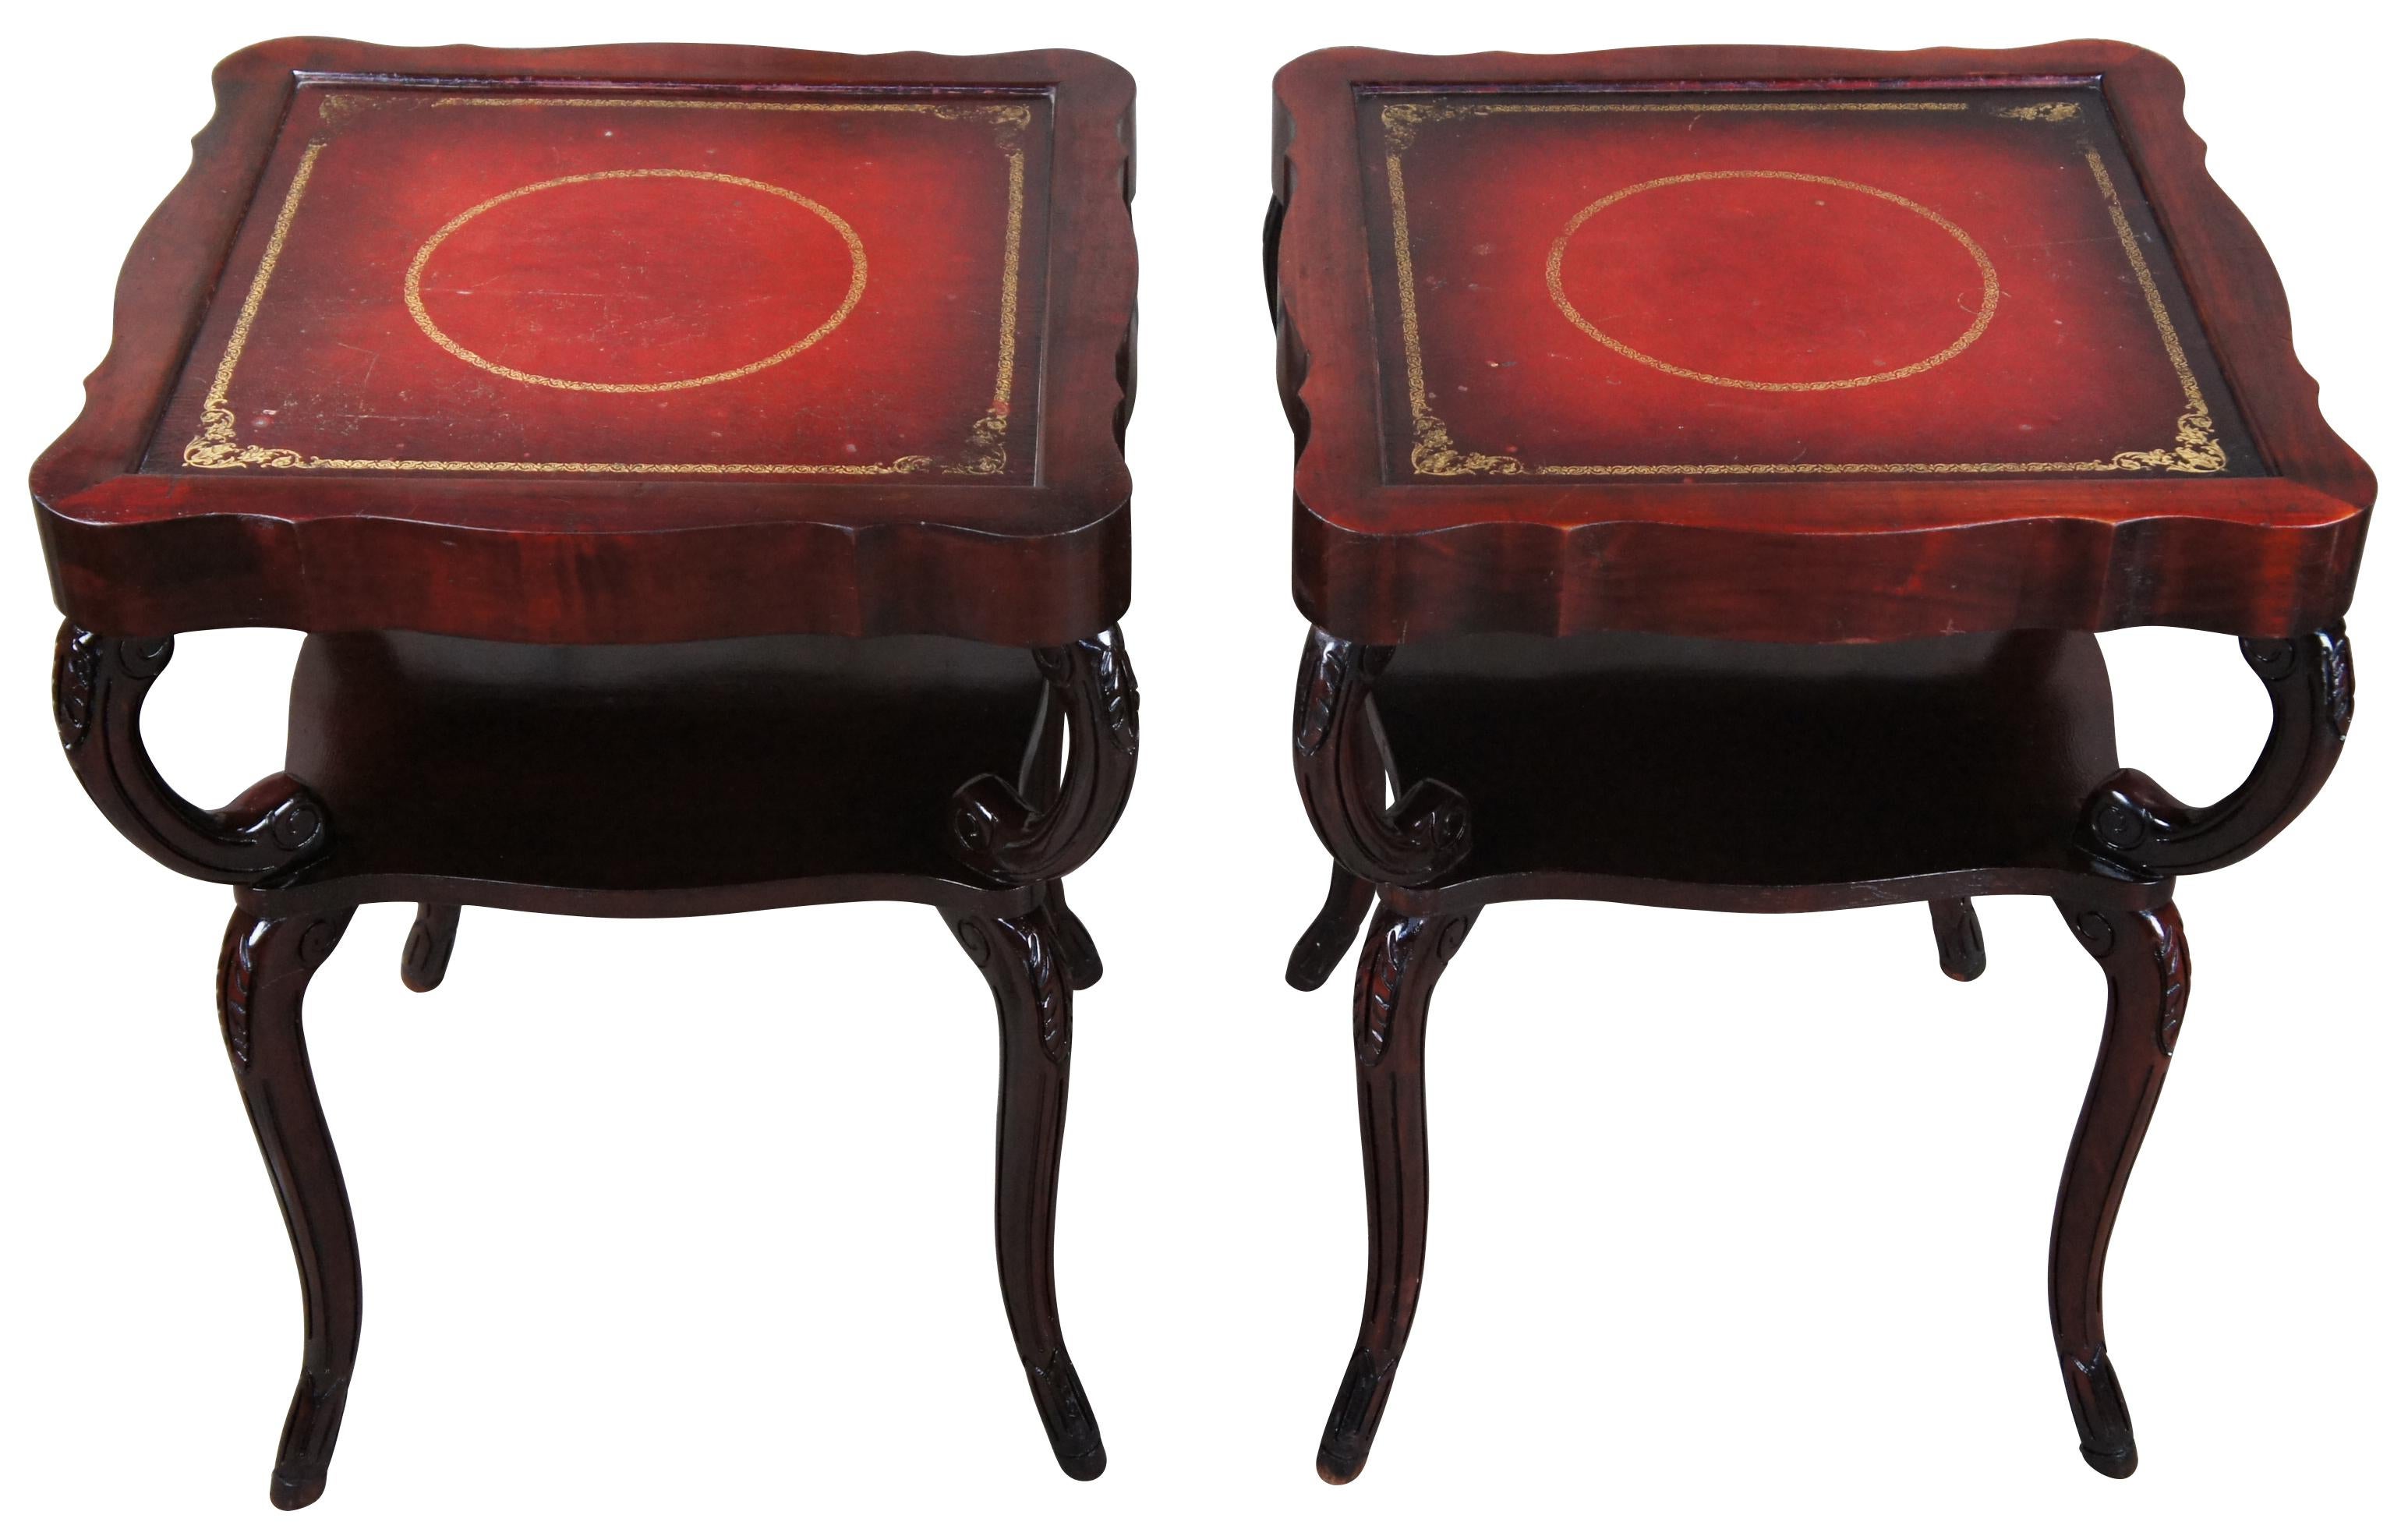 A stunning pair of Regency tiered side tables, circa 1940s. Made from mahogany with a serpentine shaped square tooled leather red top supported by carved 